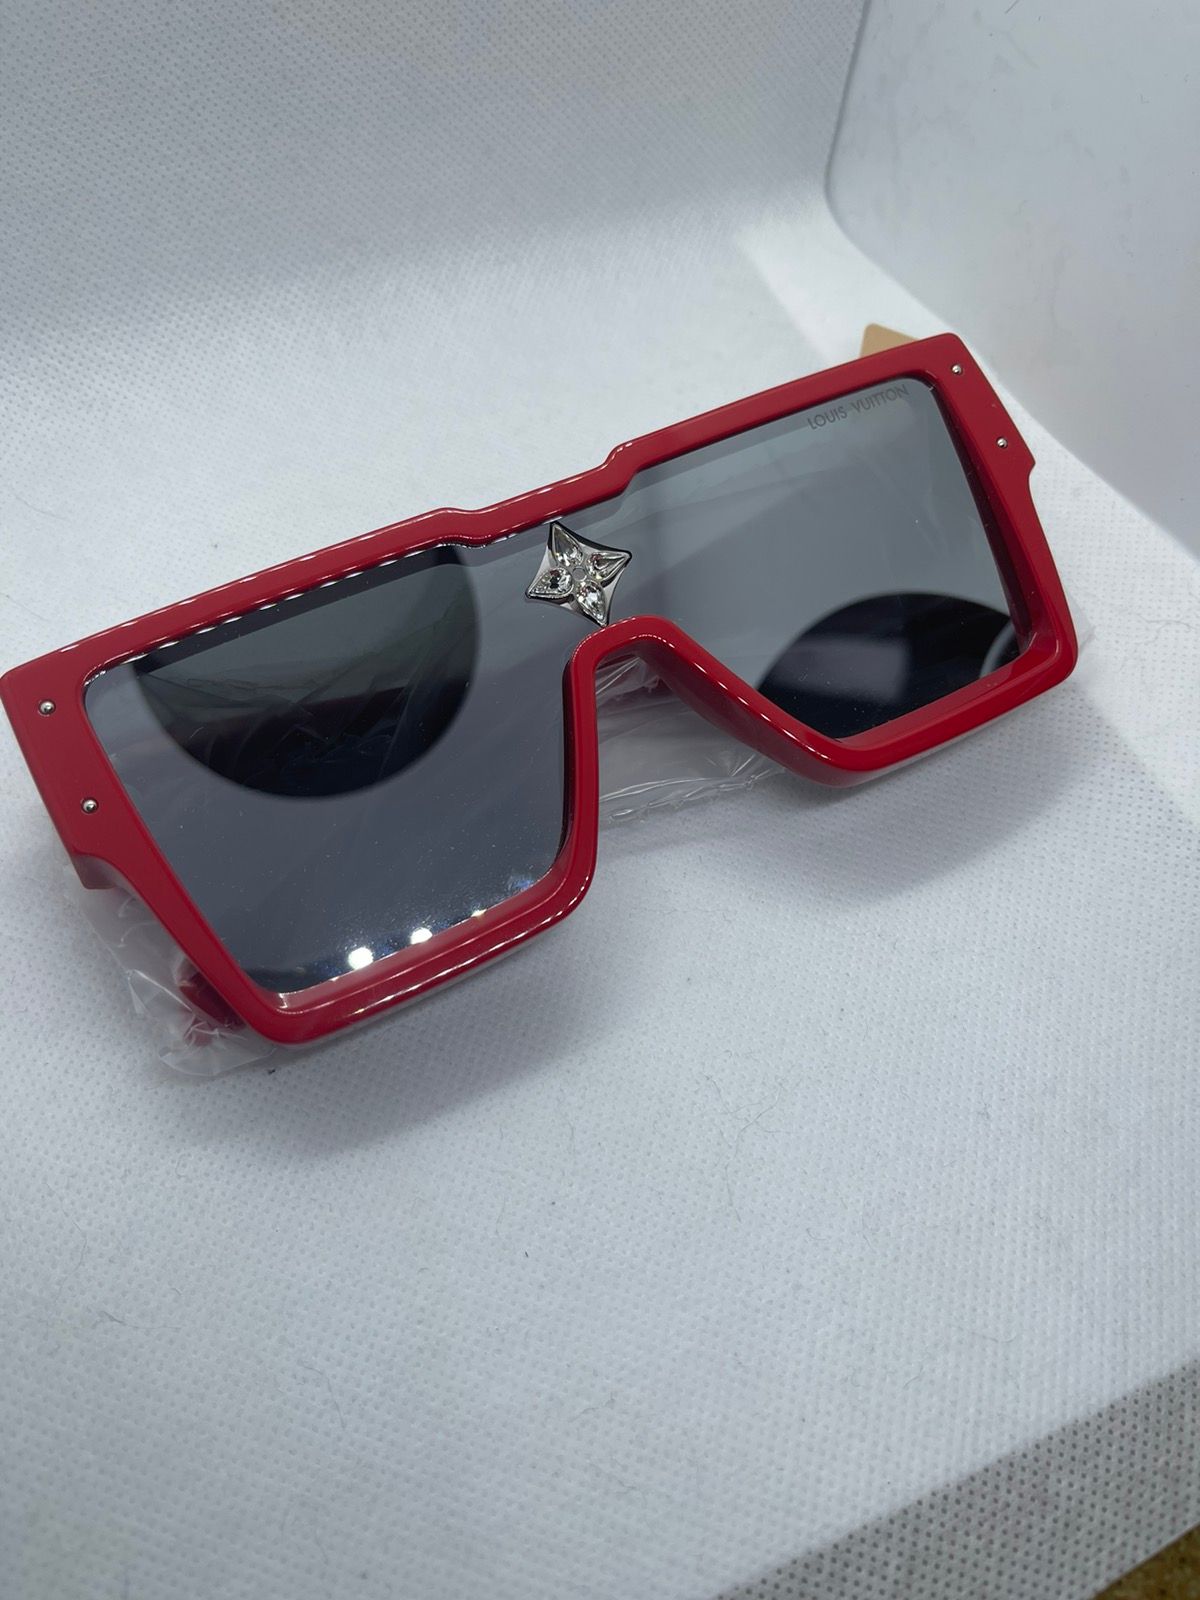 louis vuitton cyclone sunglasses red